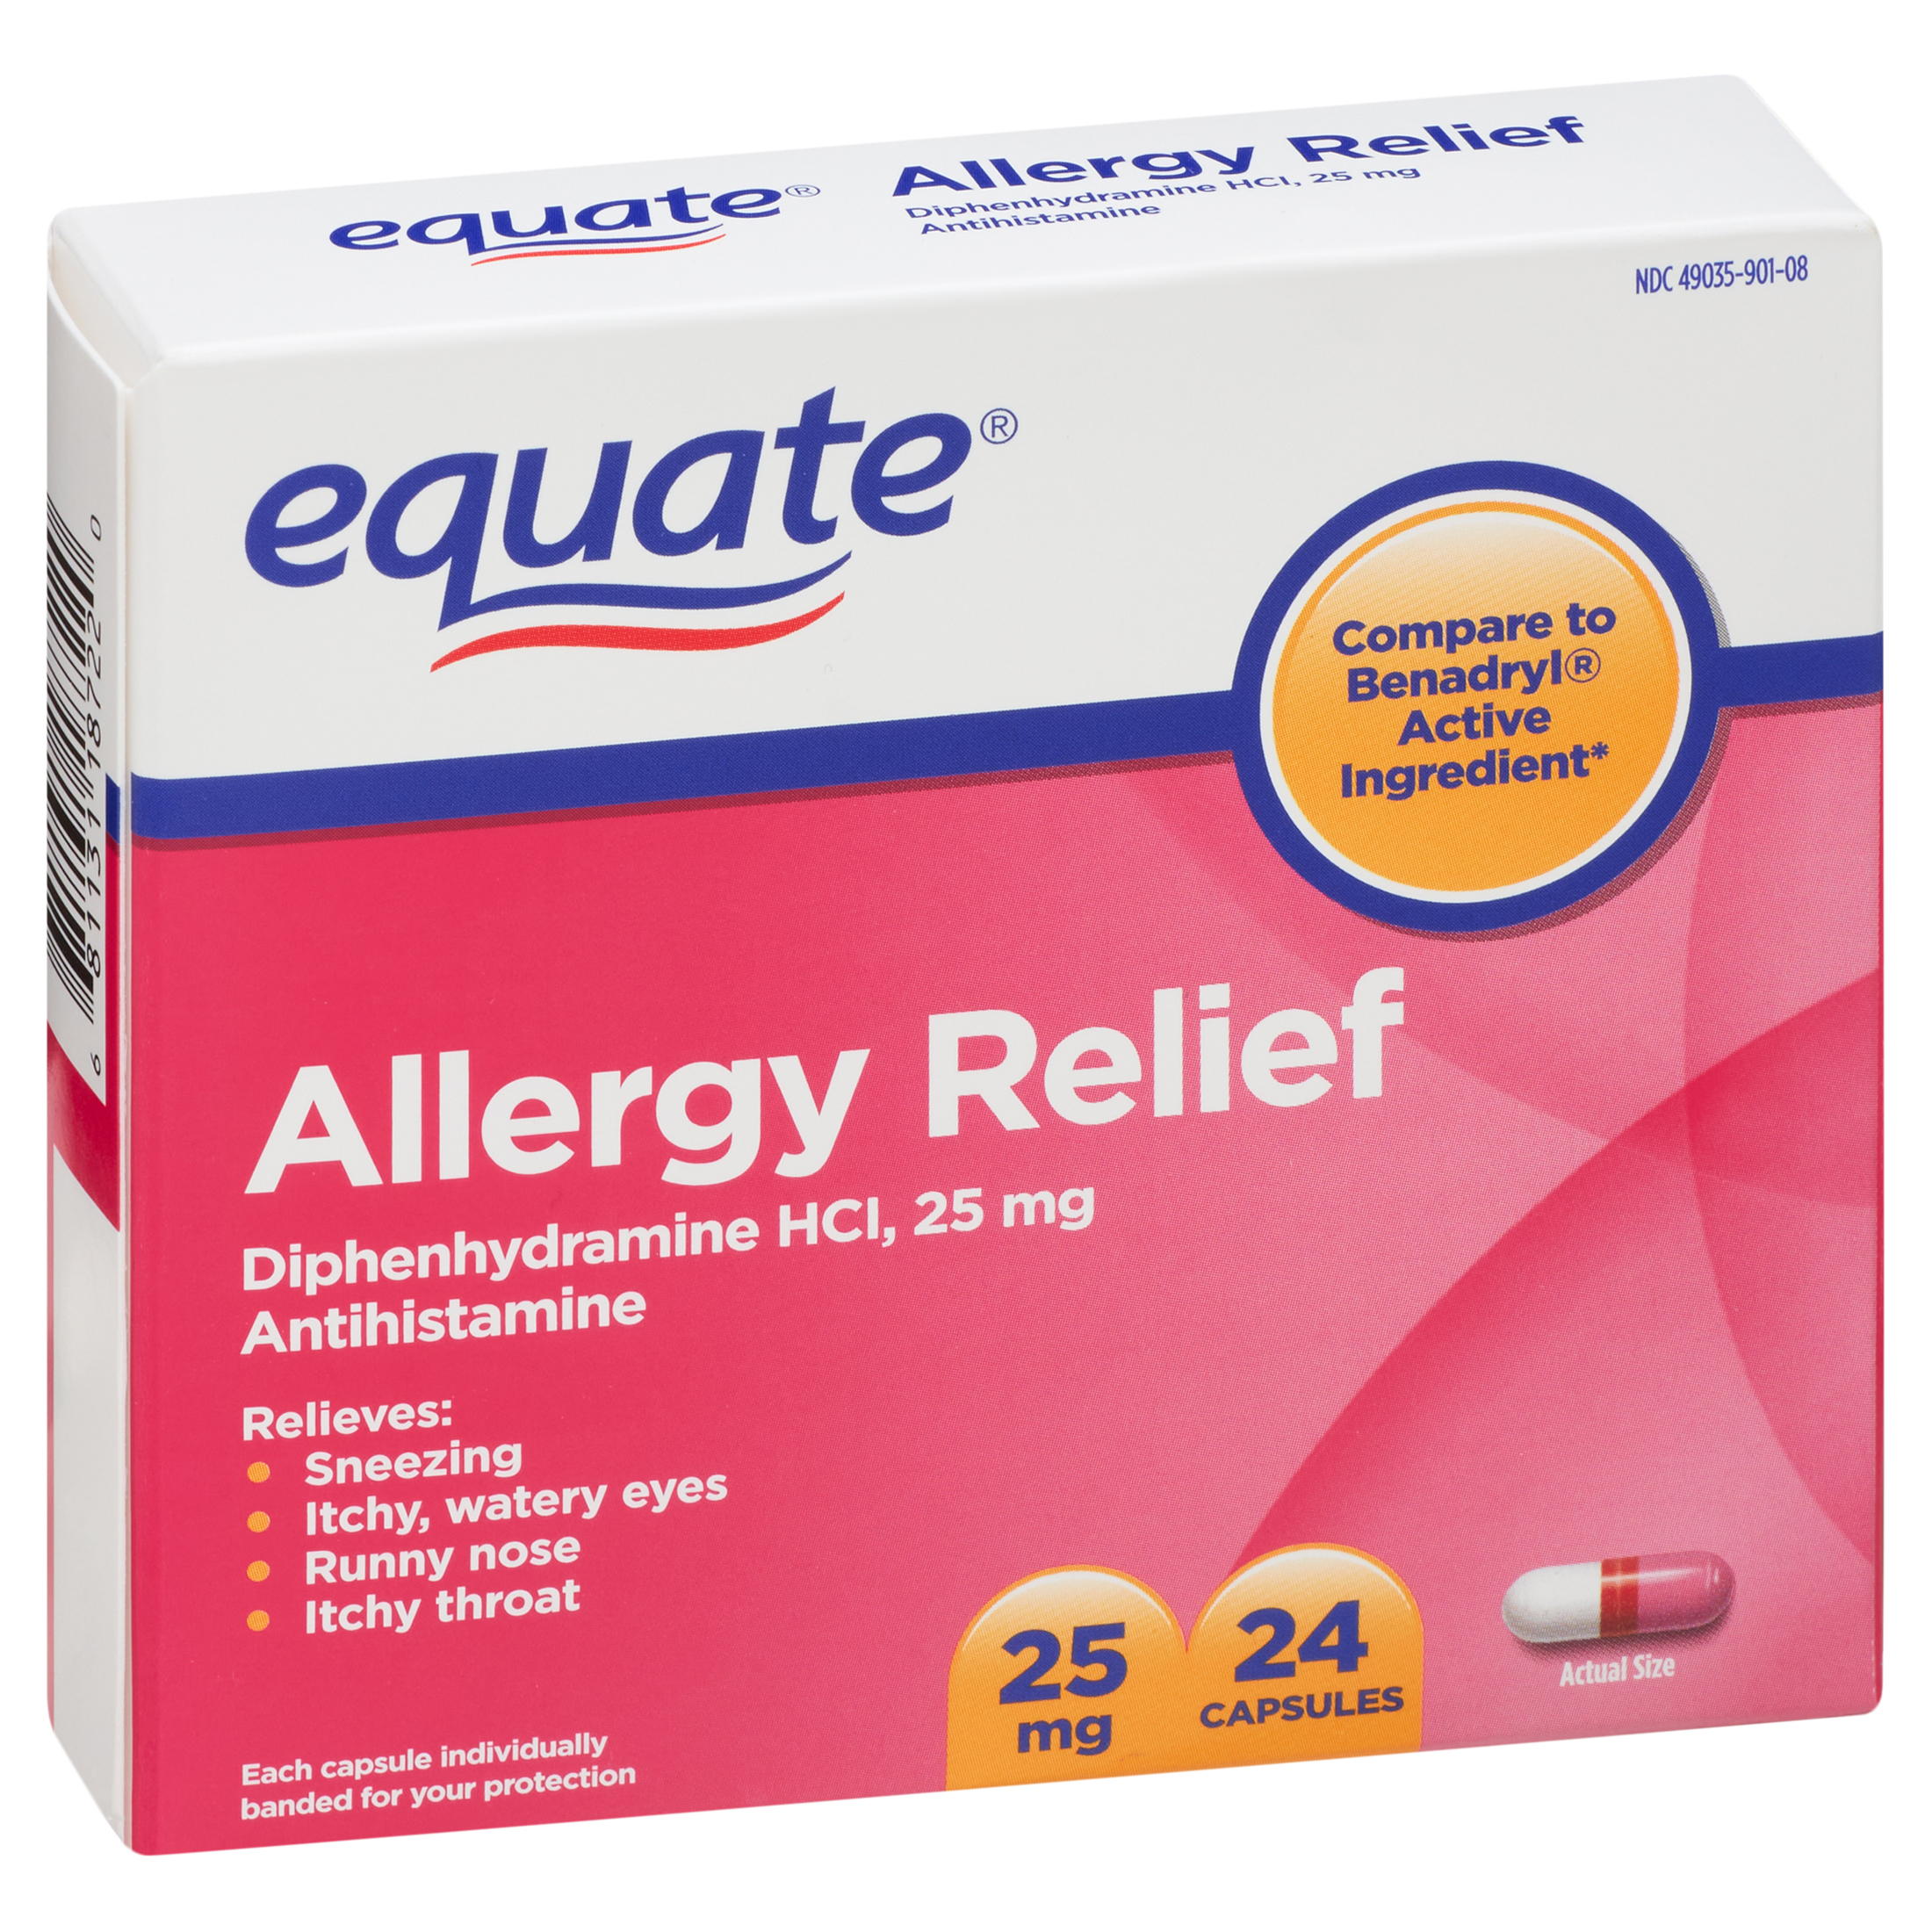 Equate Diphenhydramine Allergy Relief Capsules, 25 mg, 24 Count - image 5 of 7